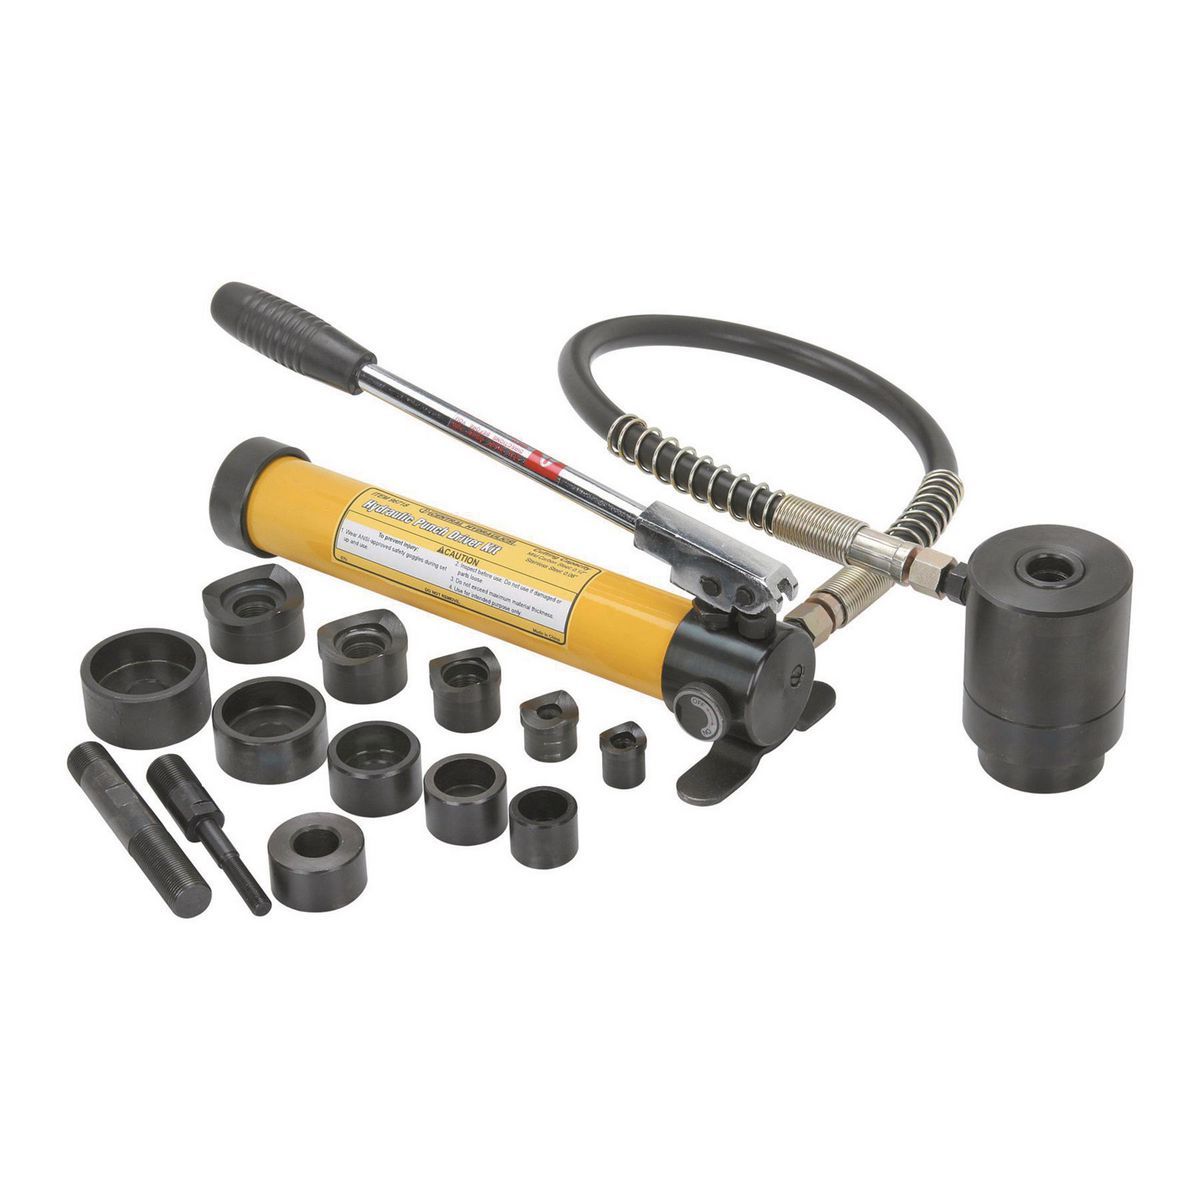 14 Piece Hydraulic Punch Driver Kit